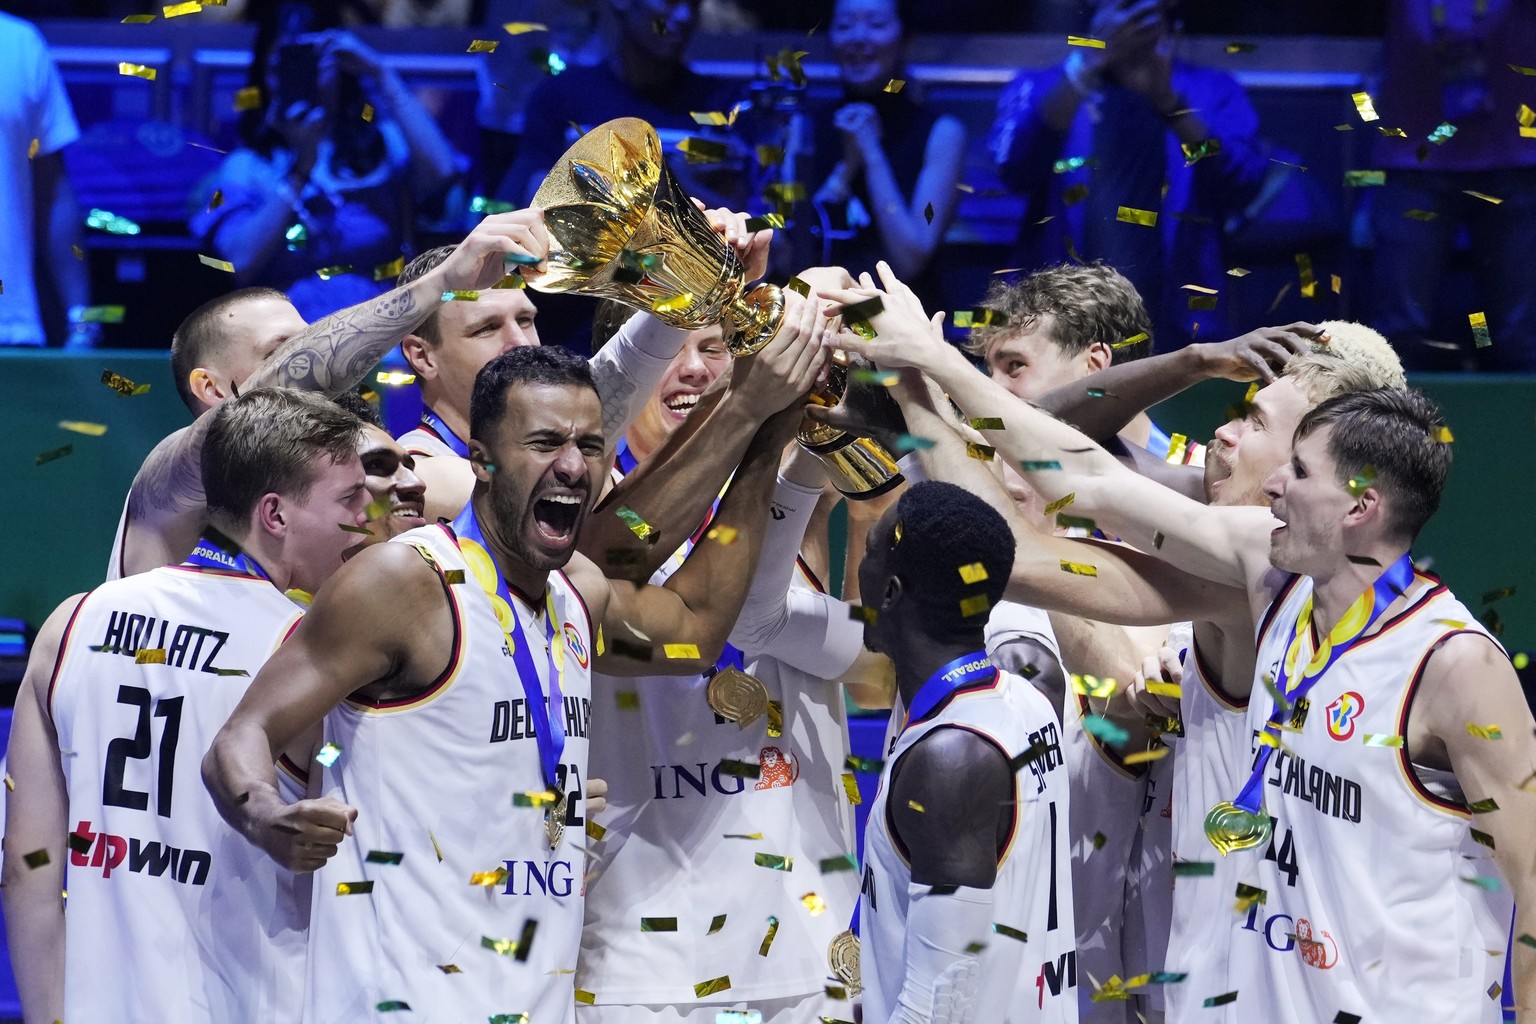 Germany celebrates with the trophy after winning the championship game of the Basketball World Cup against Serbia in Manila, Philippines, Sunday, Sept. 10, 2023. (AP Photo/Michael Conroy)